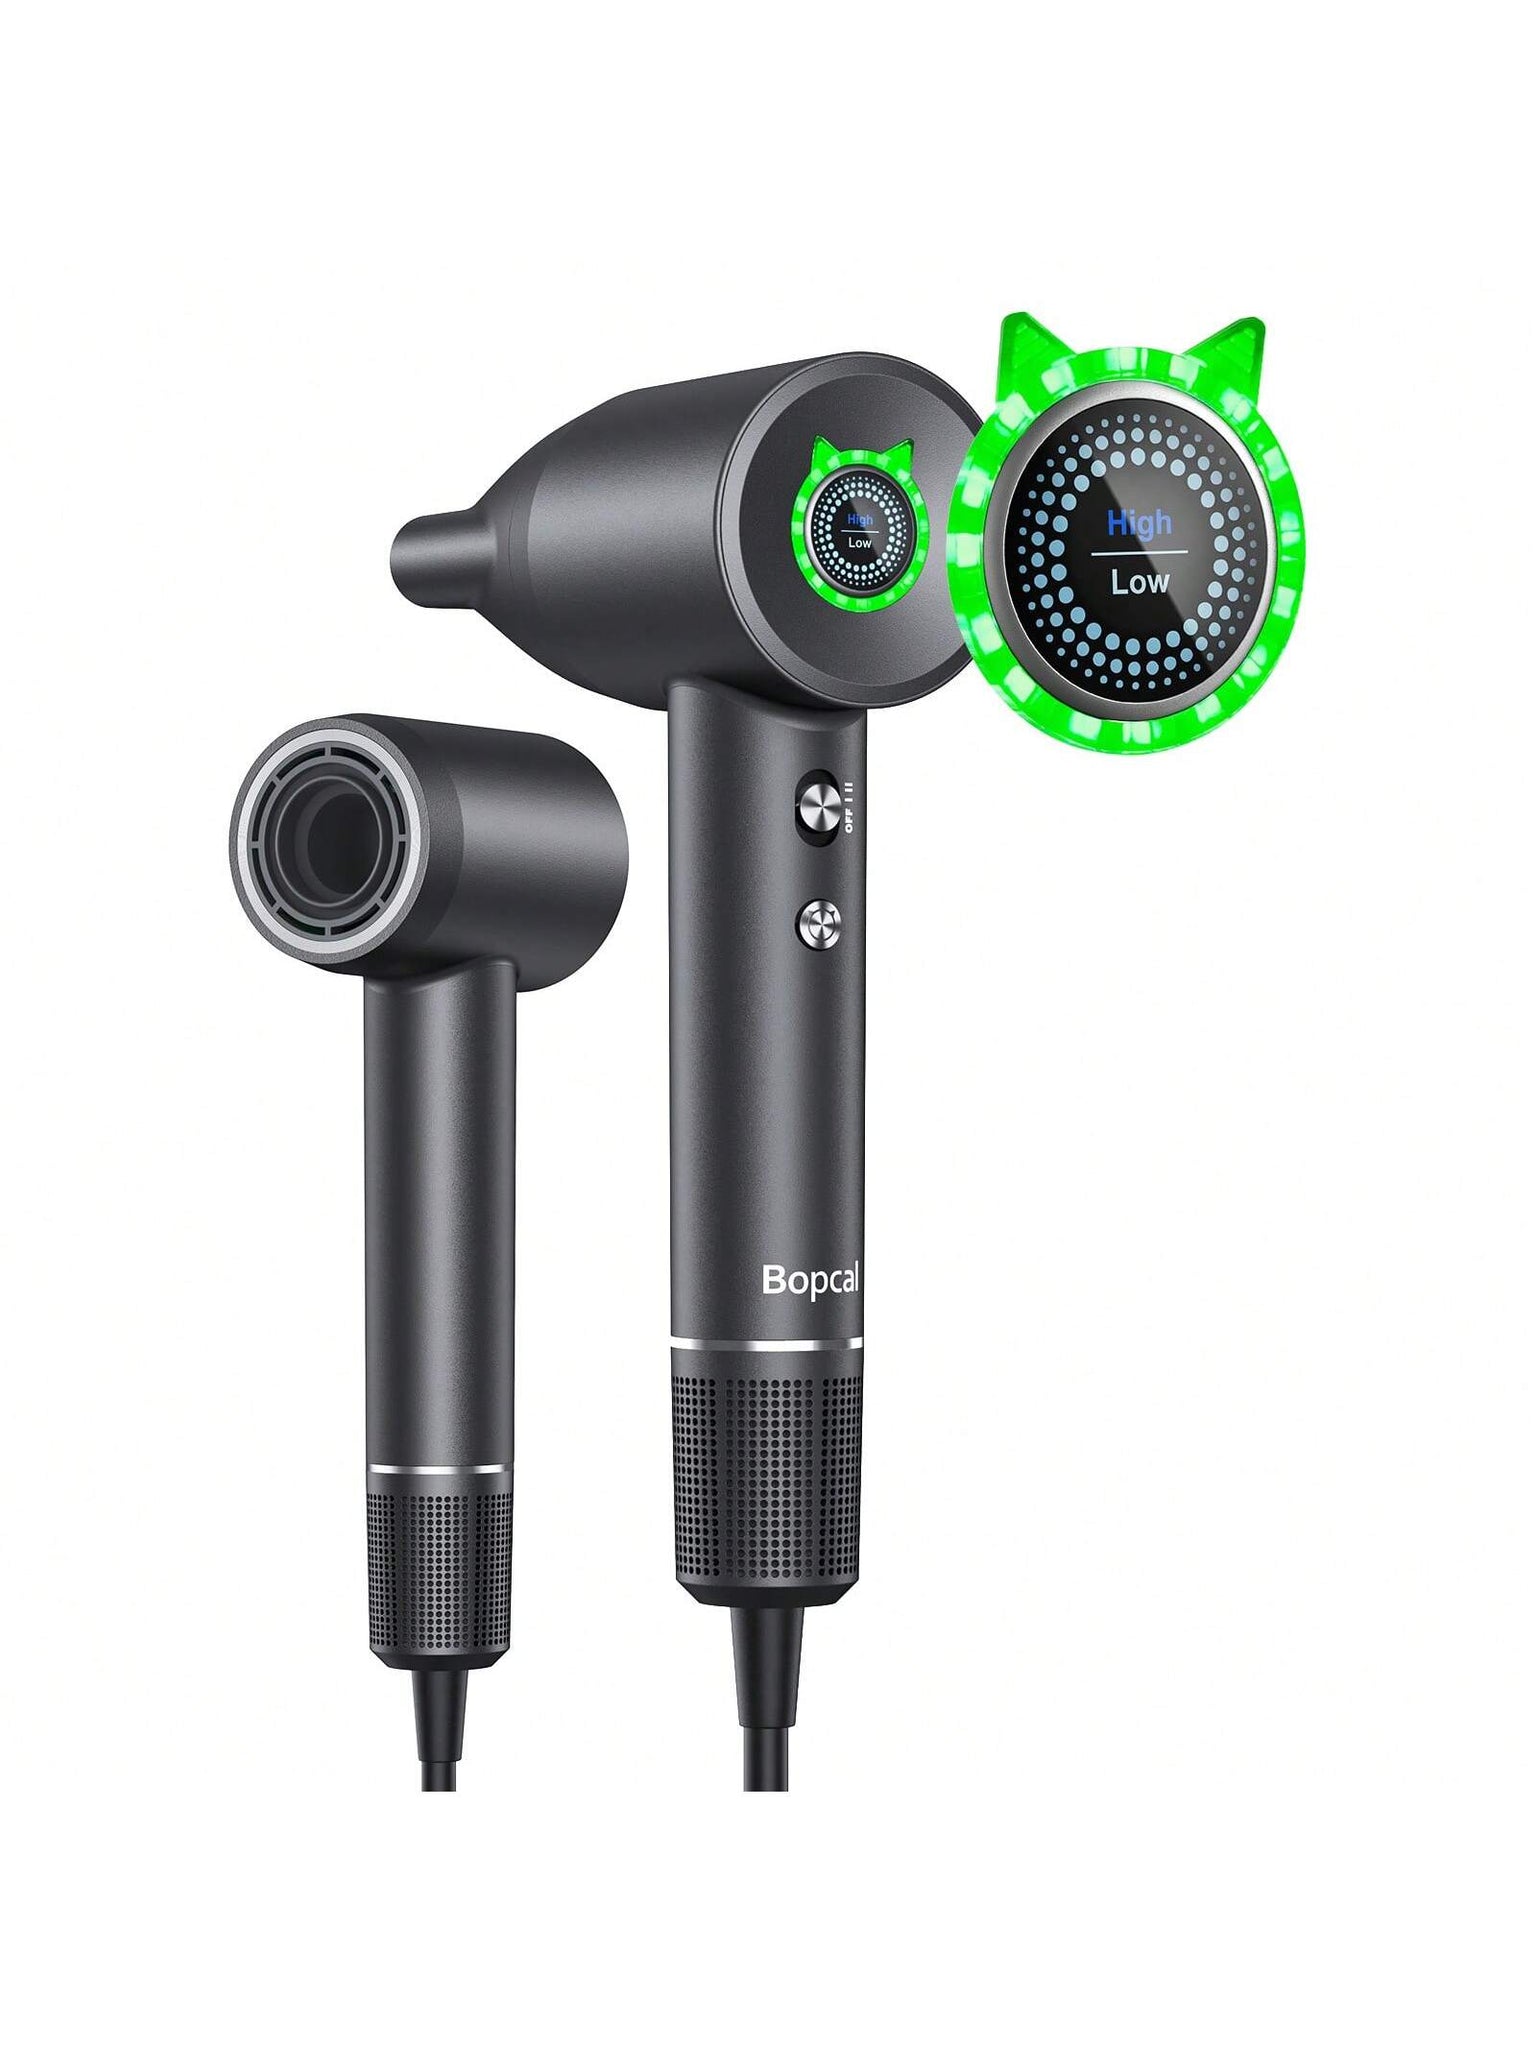 1 Black ALCI Safety Plug-Type Hair Dryer, Using High-Speed Ion Hair Dryer Technology, Quickly Drying Hair, Maintaining Constant Temperature, Intelligent Temperature Control, Professional Quality, With Screen Display, 110,000 RPM High-Speed Brushless--2